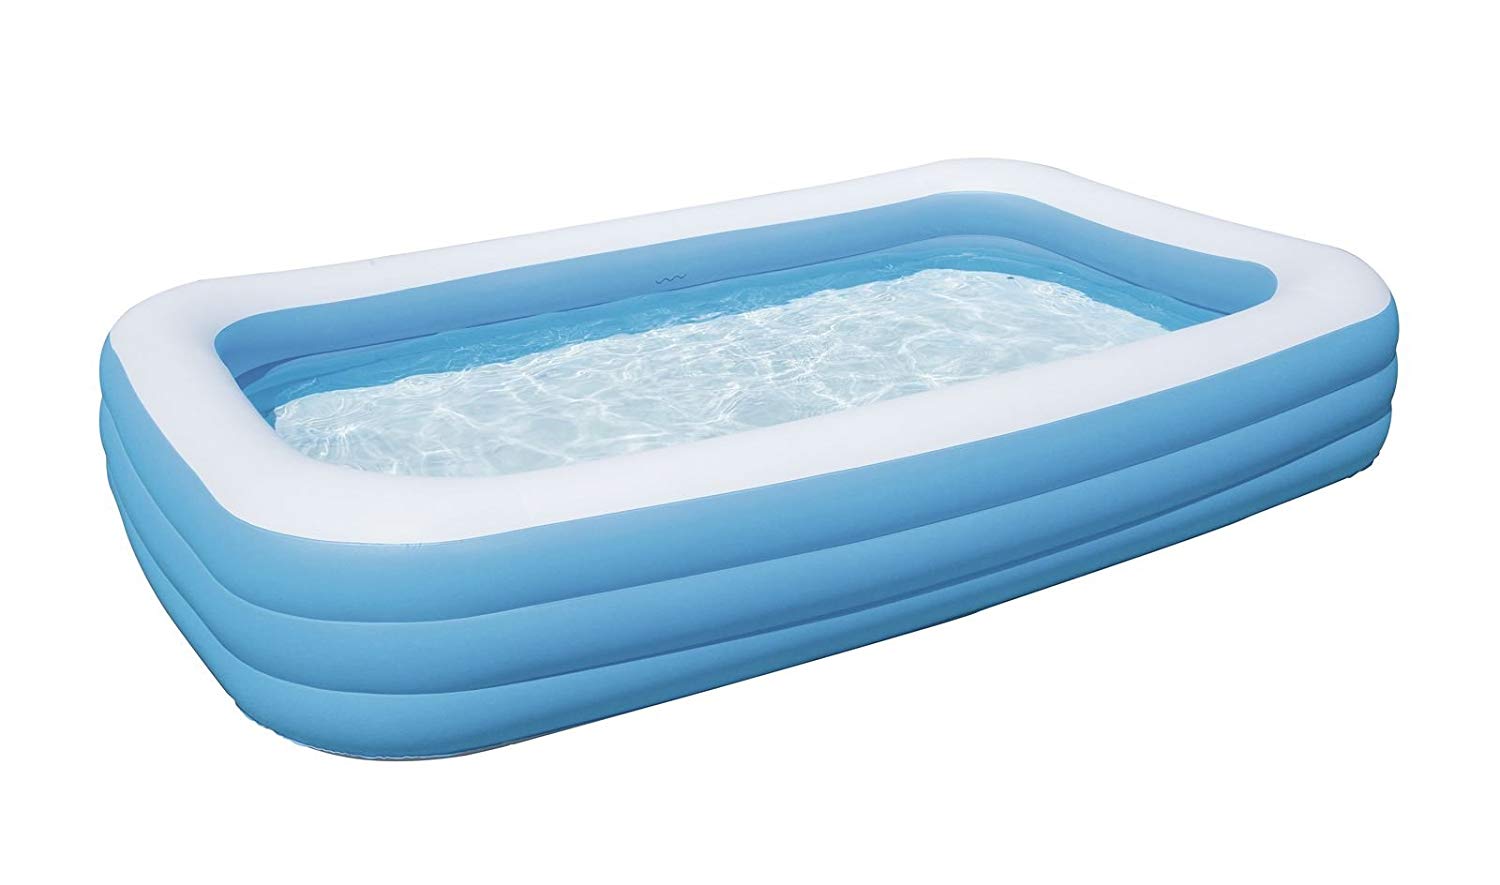 Bestway Family Pool Deluxe, rectangular pool for children, easy to ...